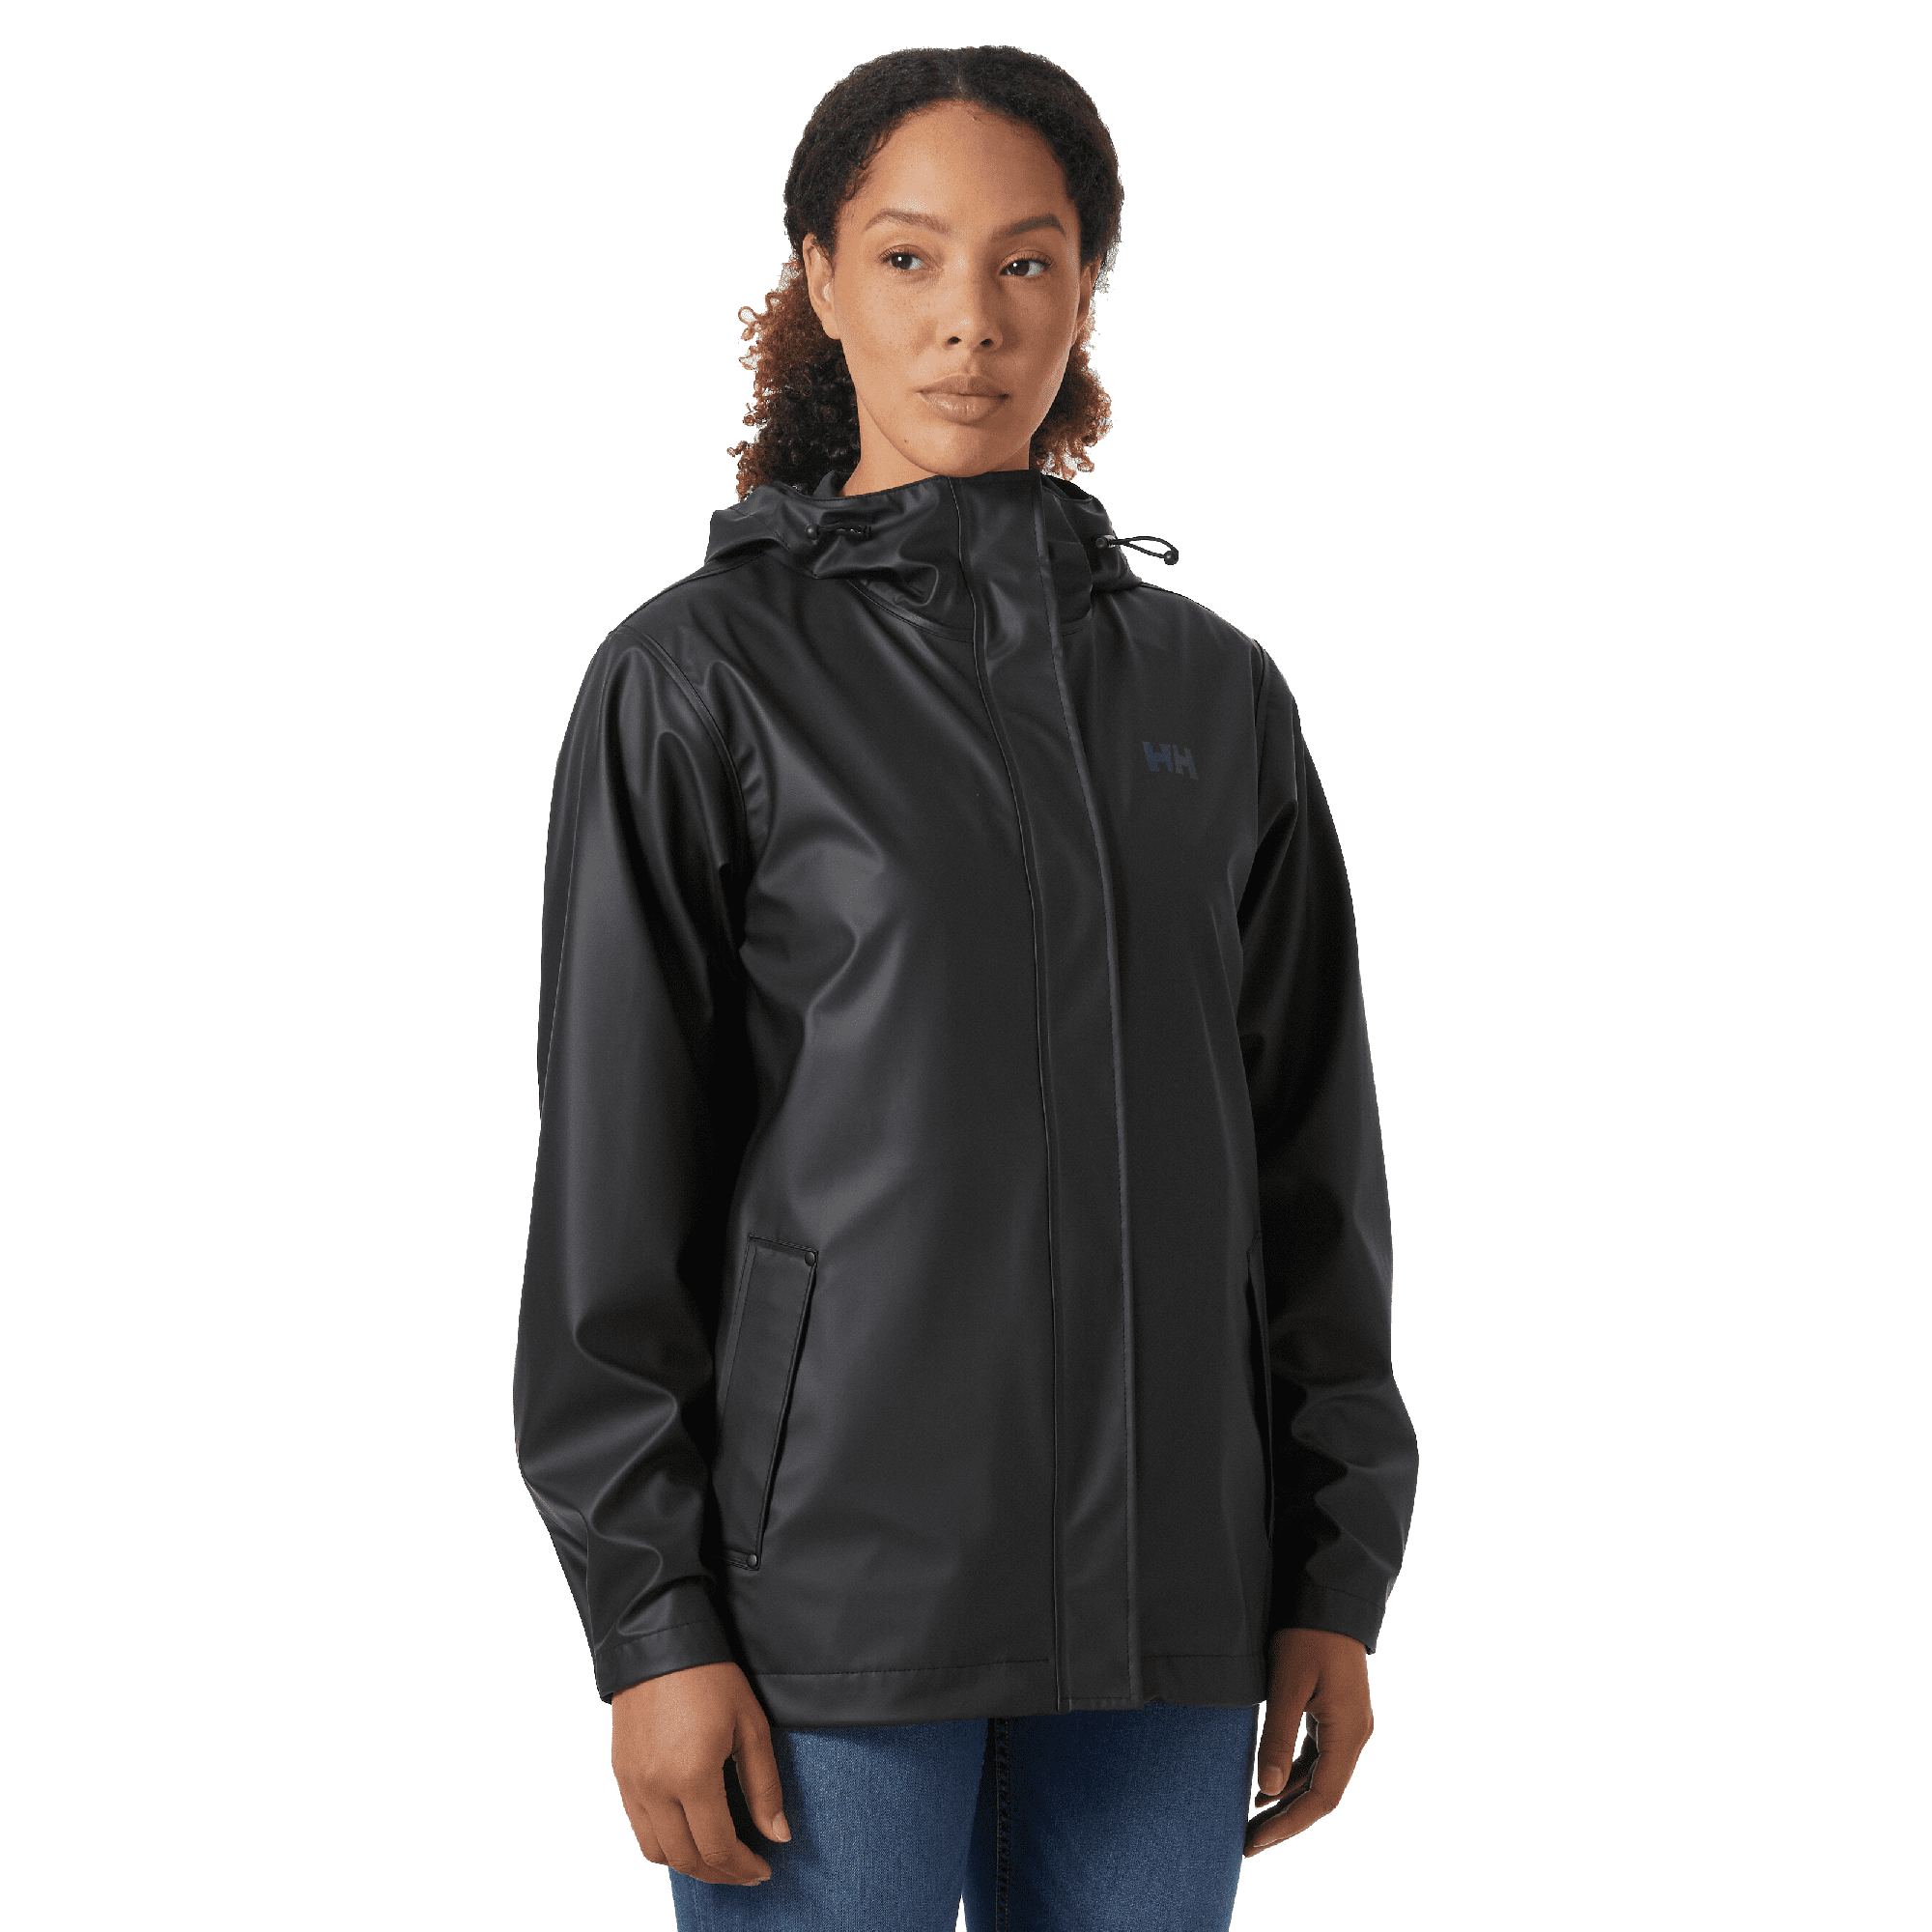 Helly Hansen Chamarra impermeable para mujer